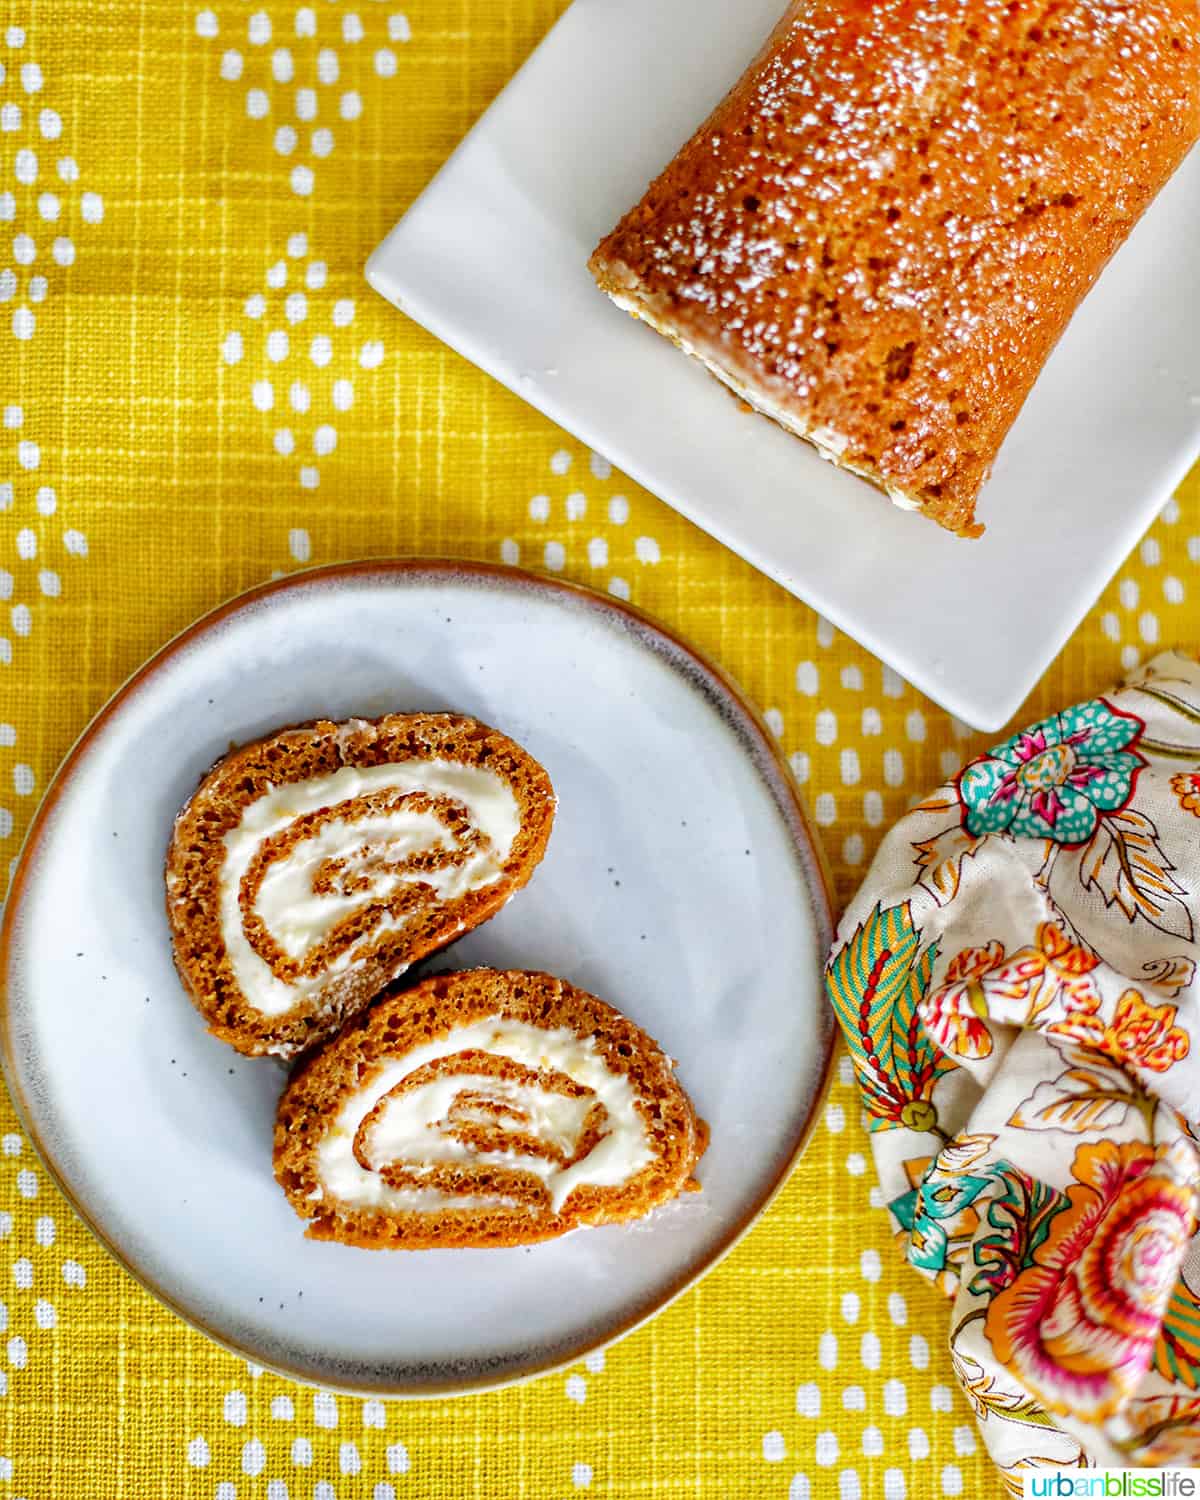 pumpkin cream cheese roll up and slices on plates and yellow tablecloth with colorful napkin.